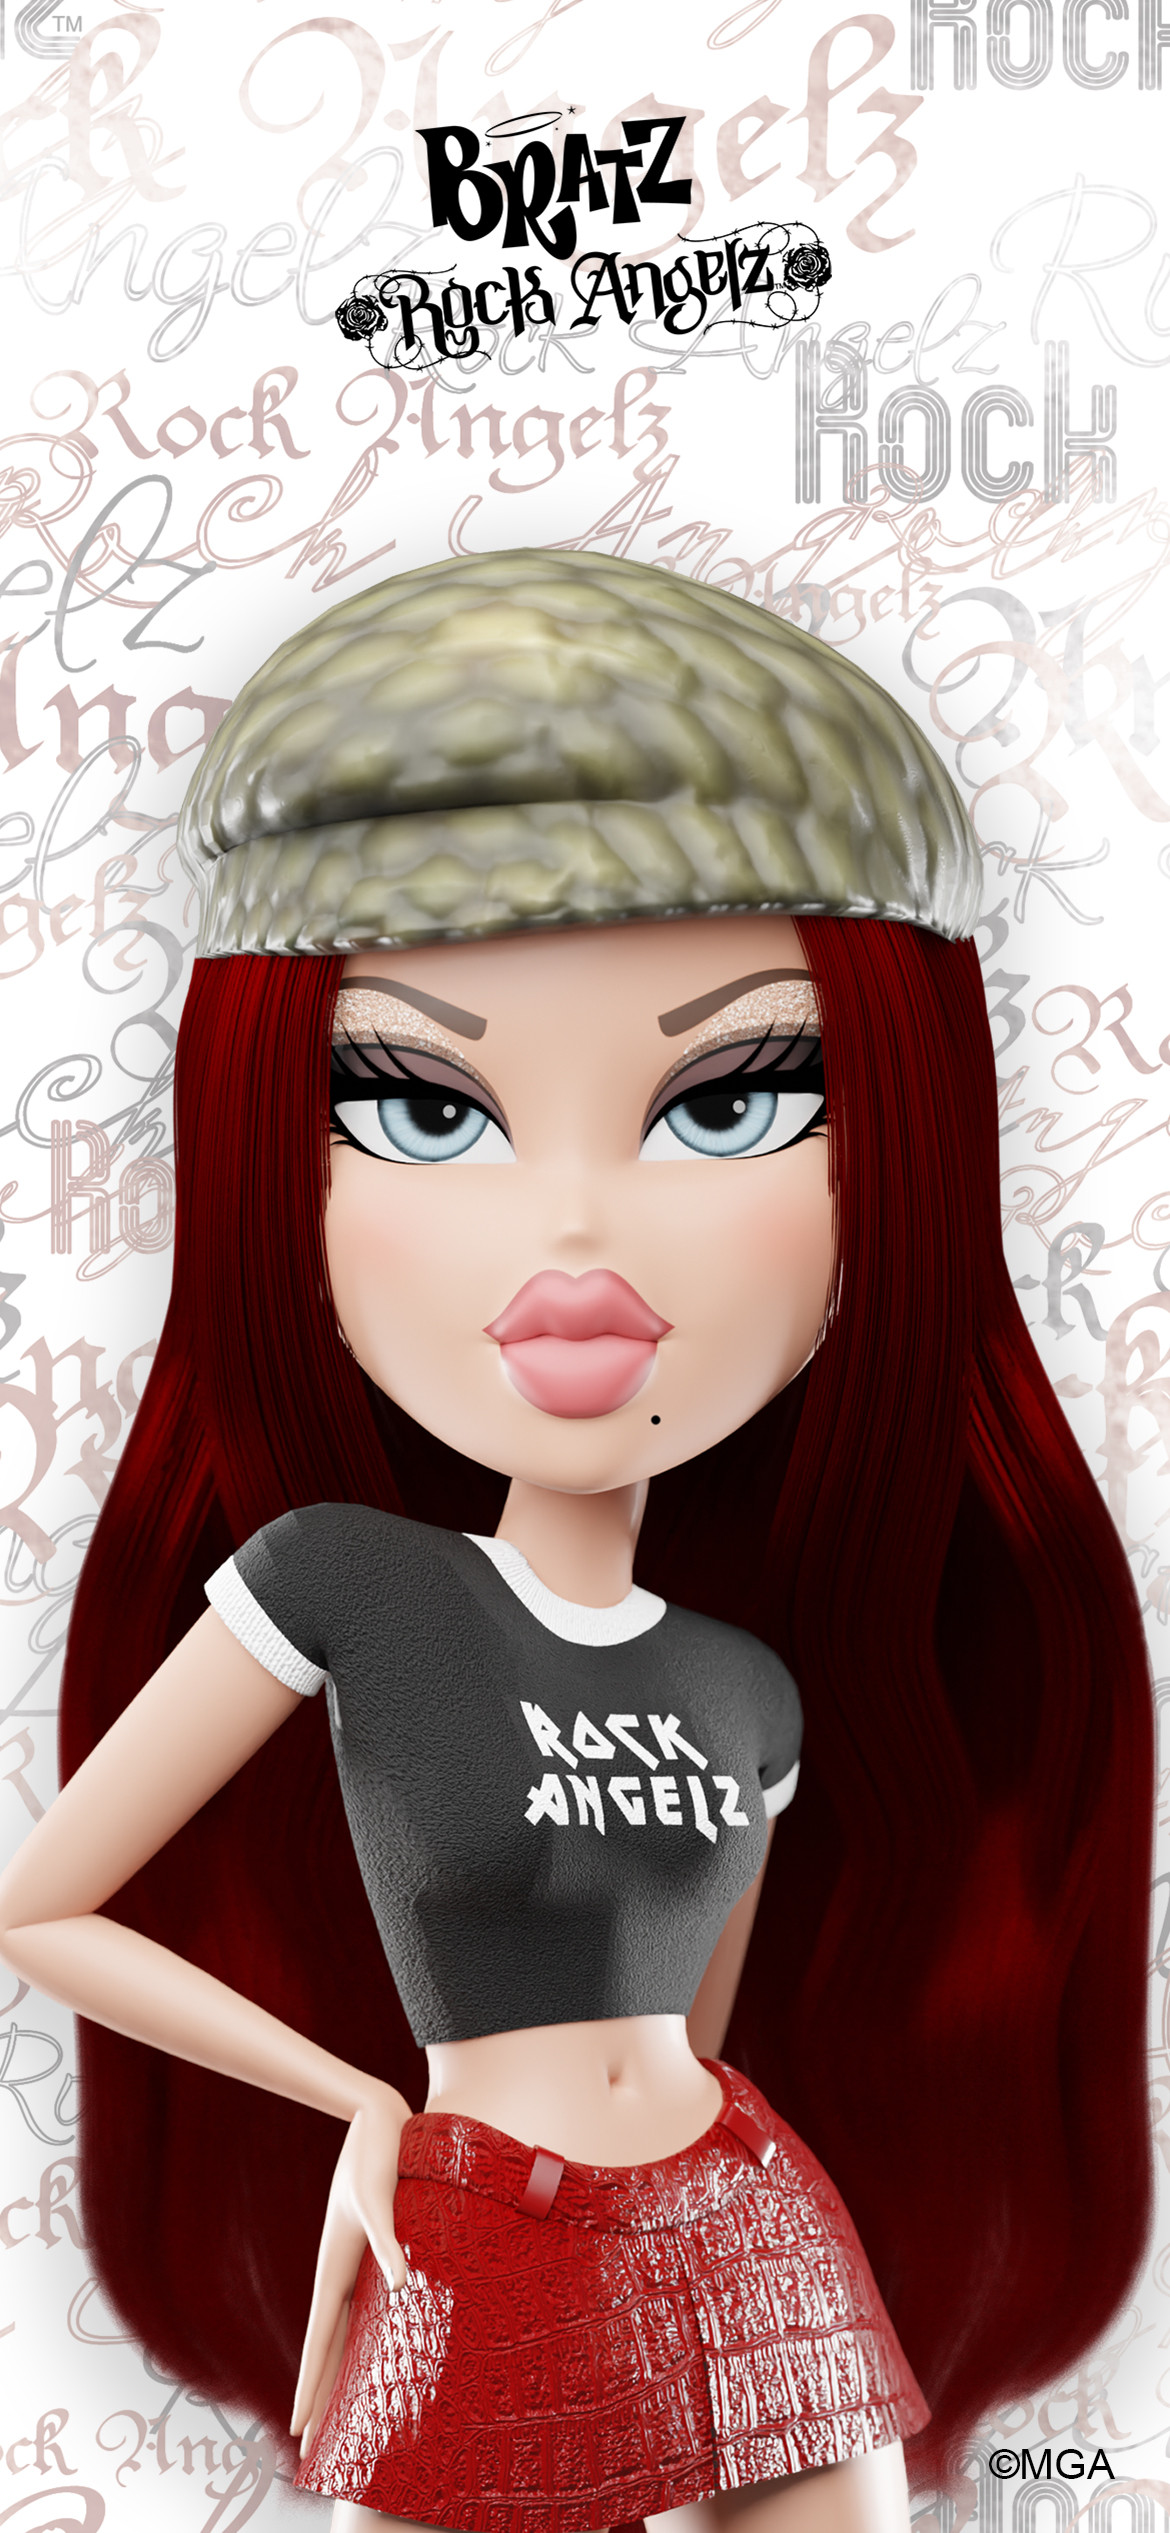 A red head doll with a hat on. - Bratz